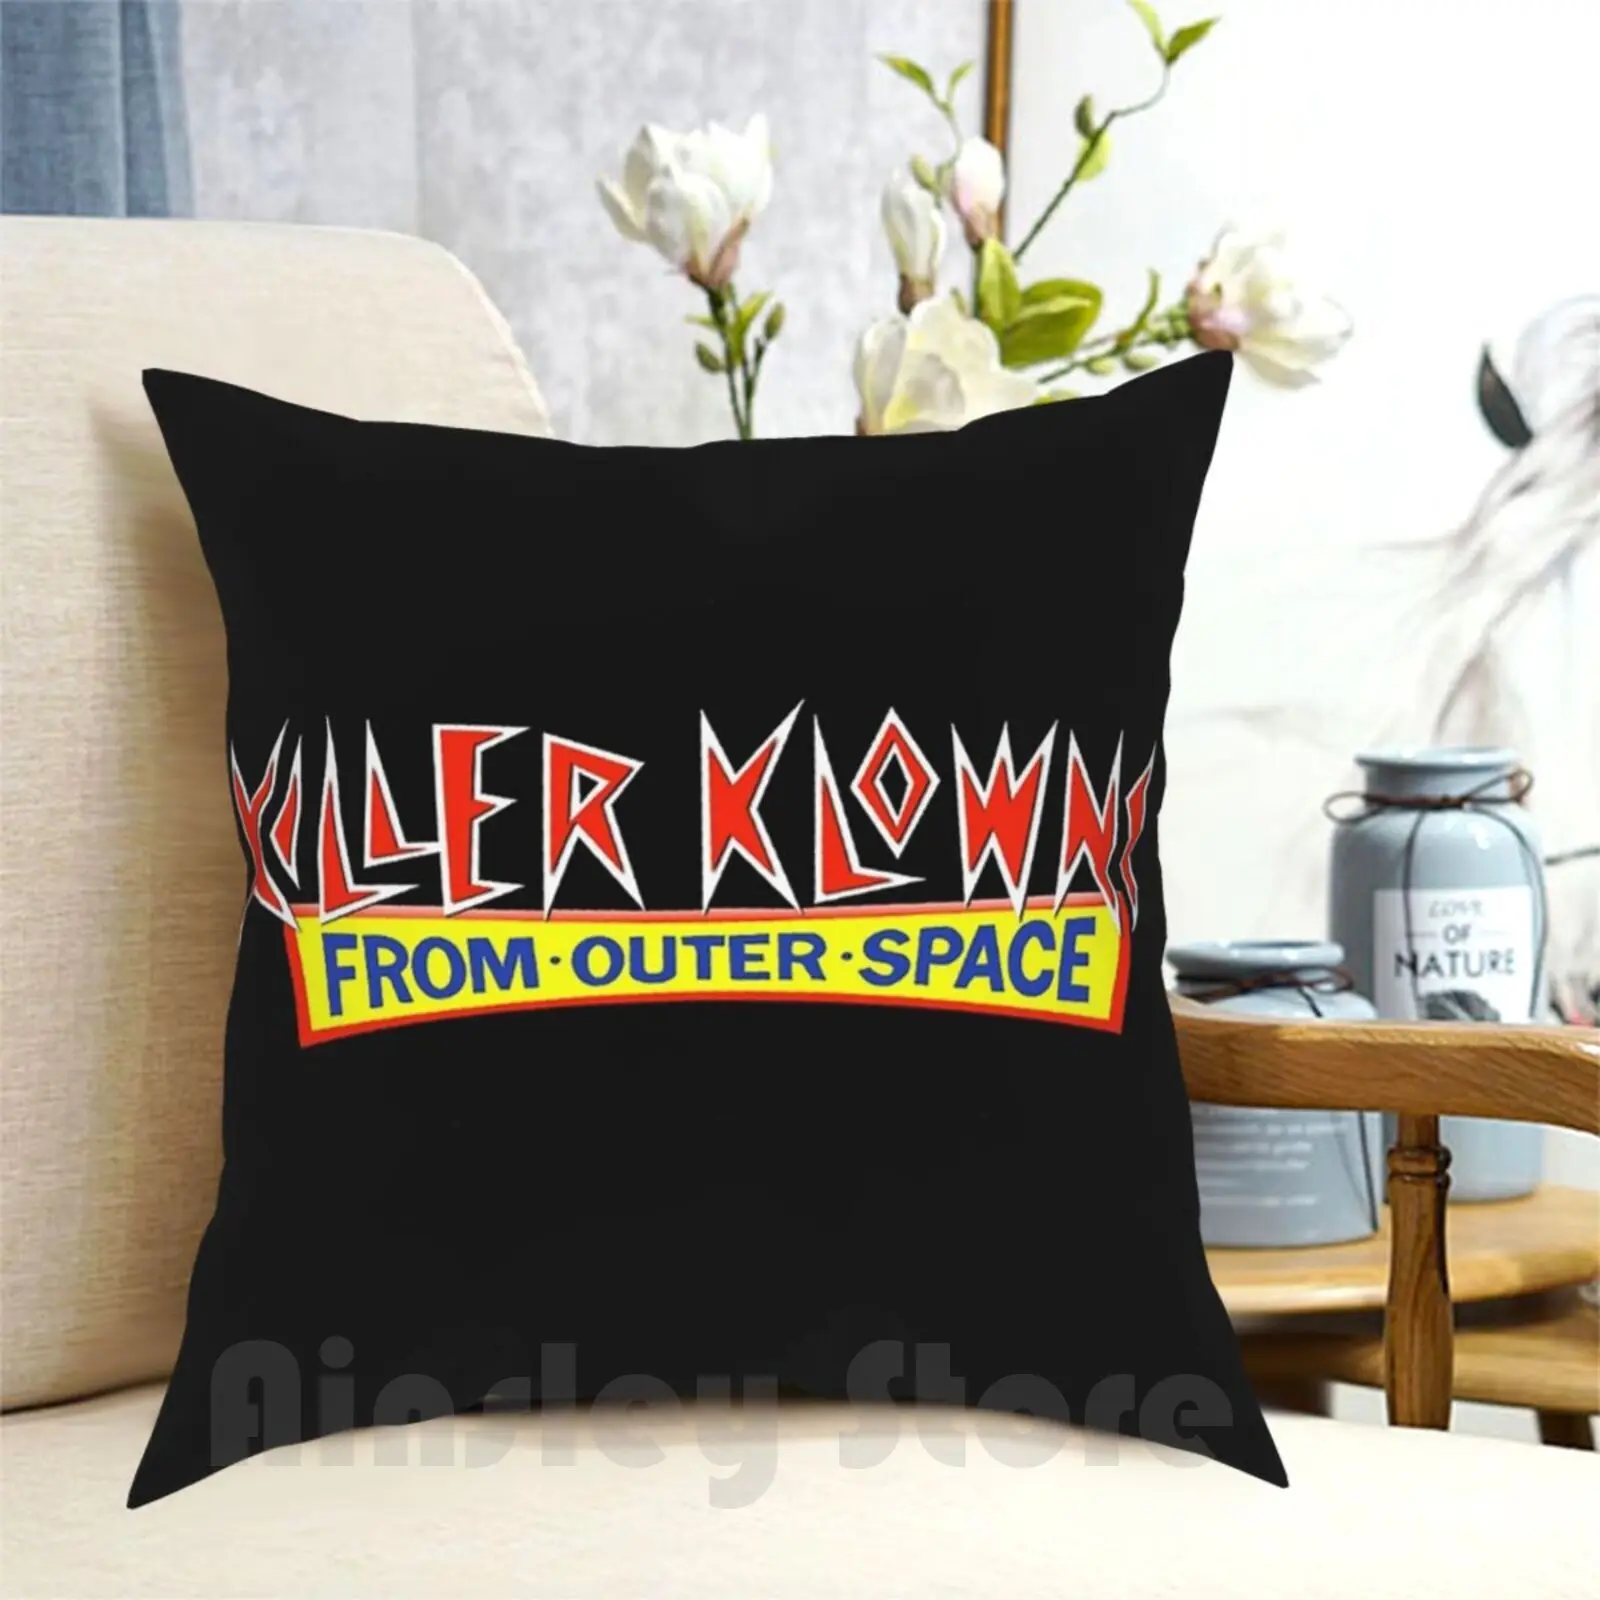 

Killer Klowns From Outer Space Pillow Case Printed Home Soft DIY Pillow cover Killer Klowns Horror 80S Retro Vhs Video